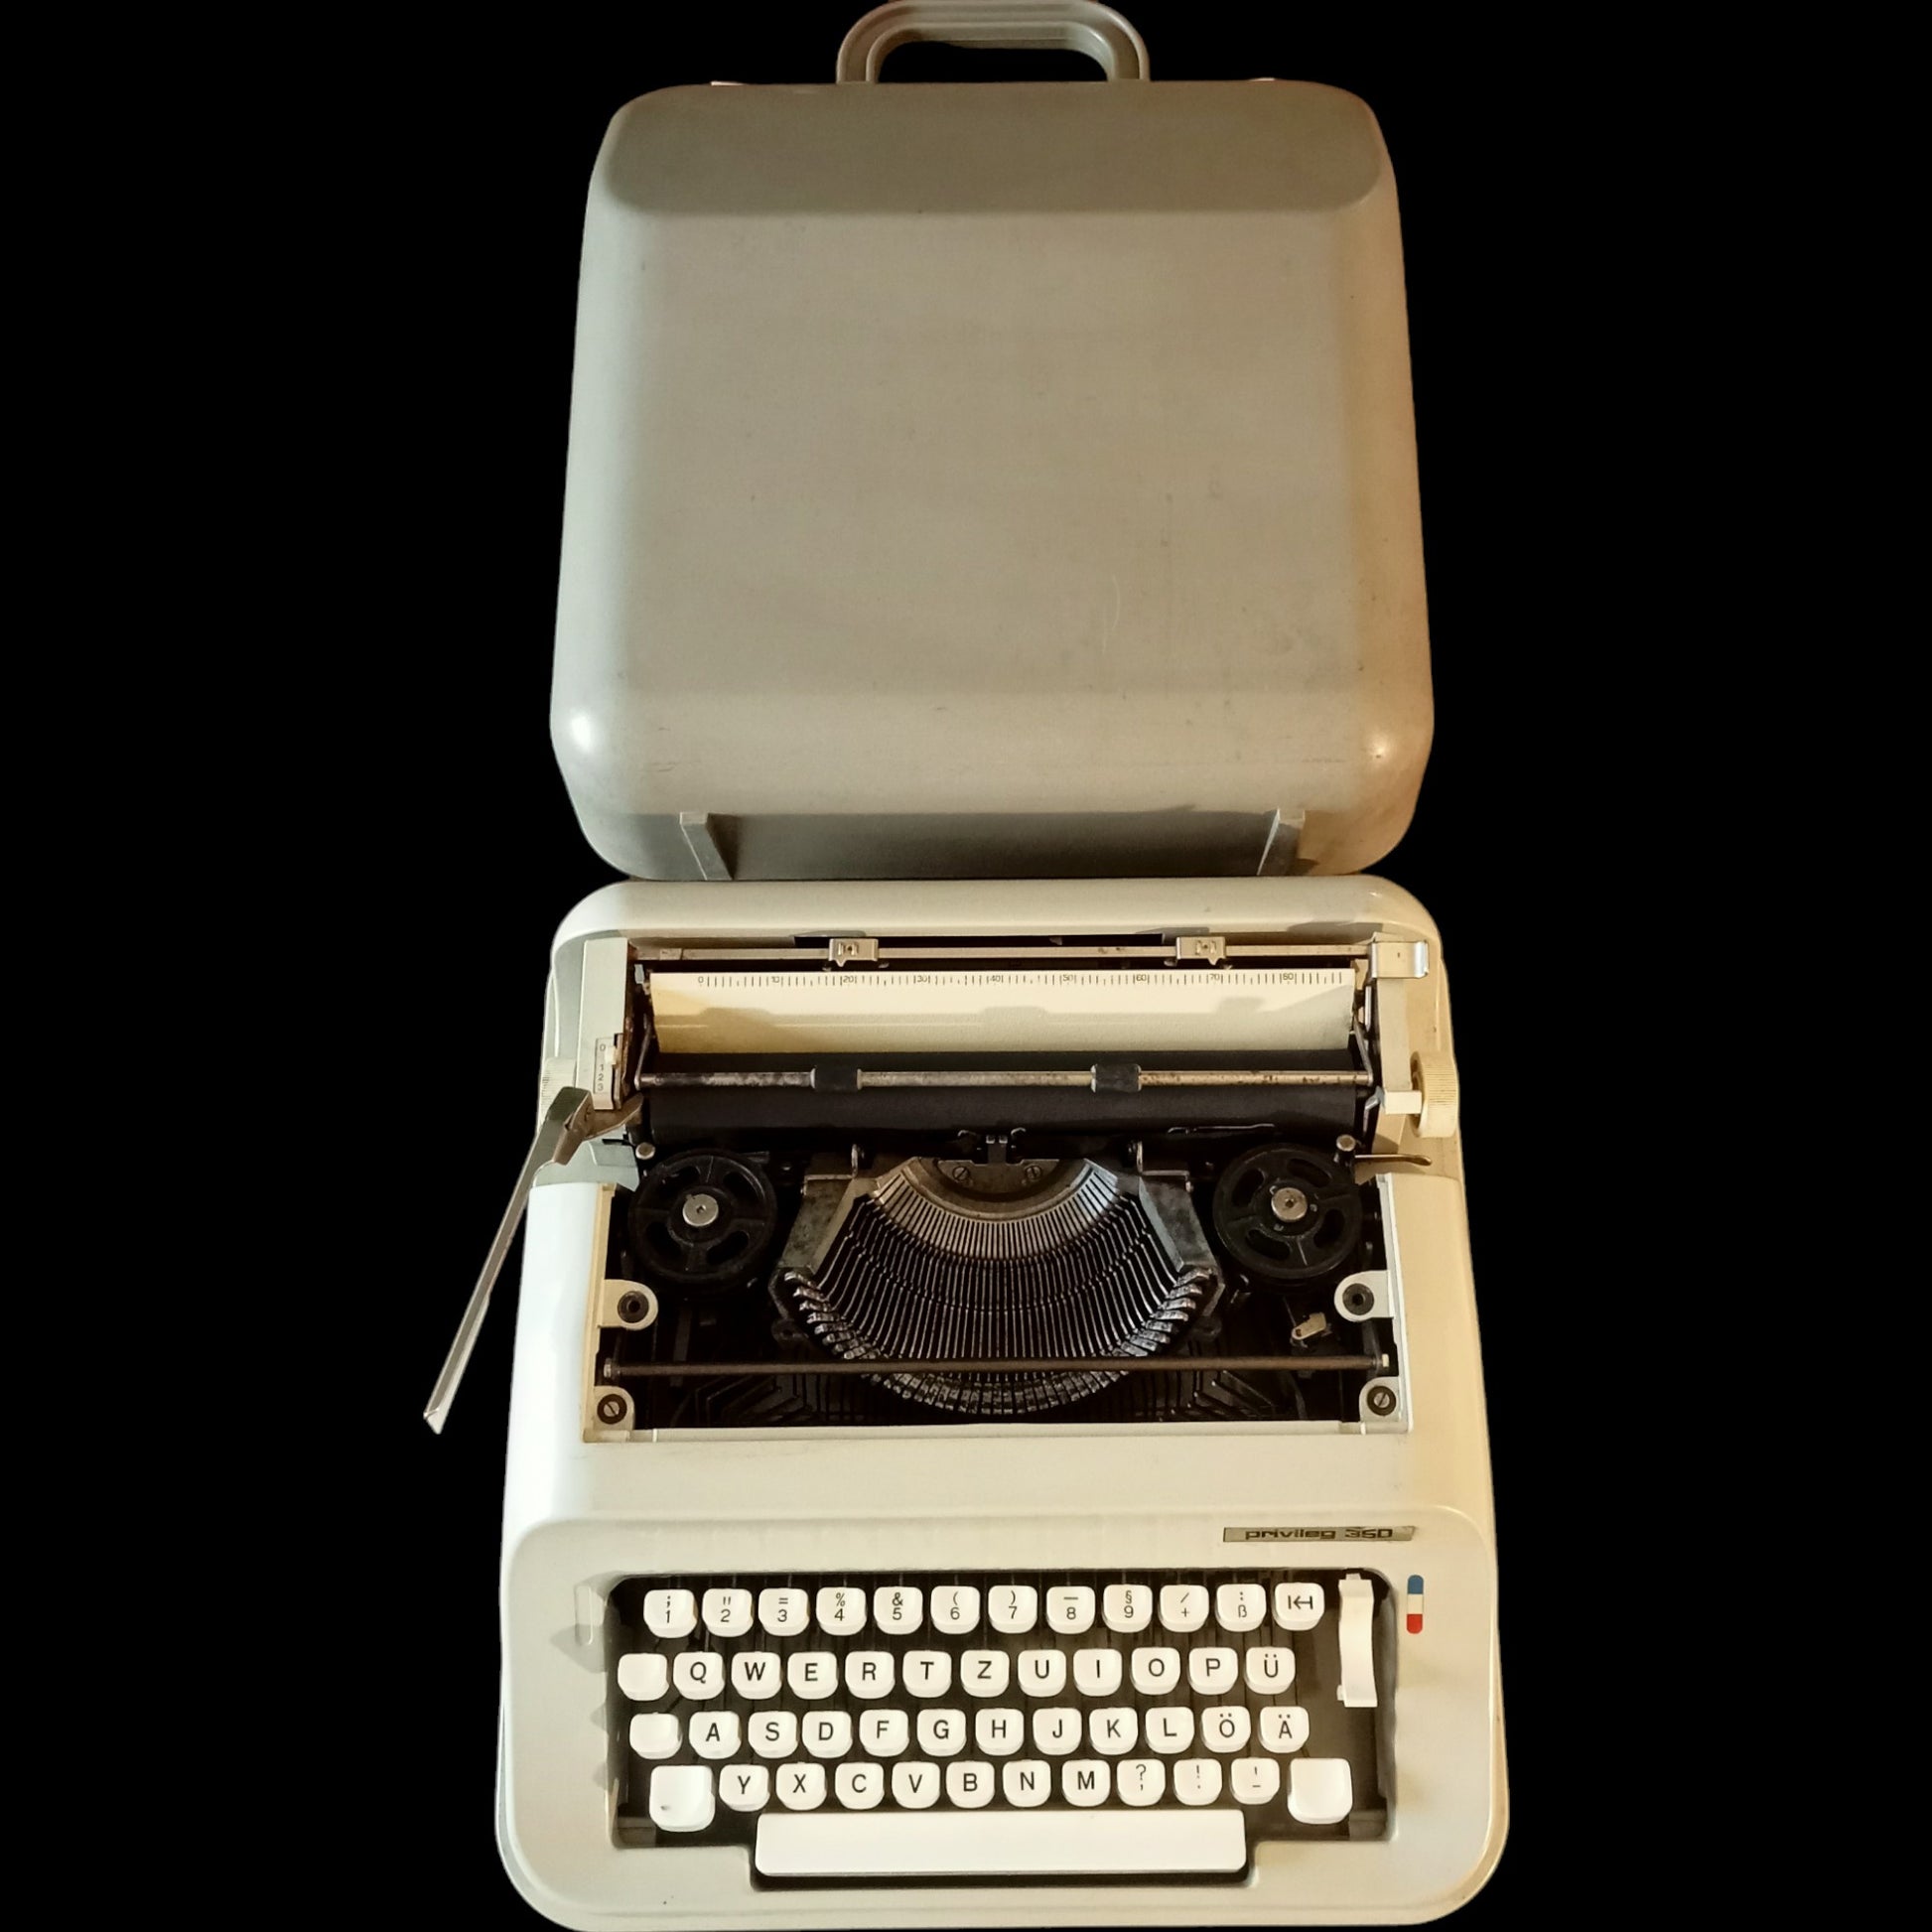 Image of Privileg 350 Typewriter. Available from universaltypewritercompany.in